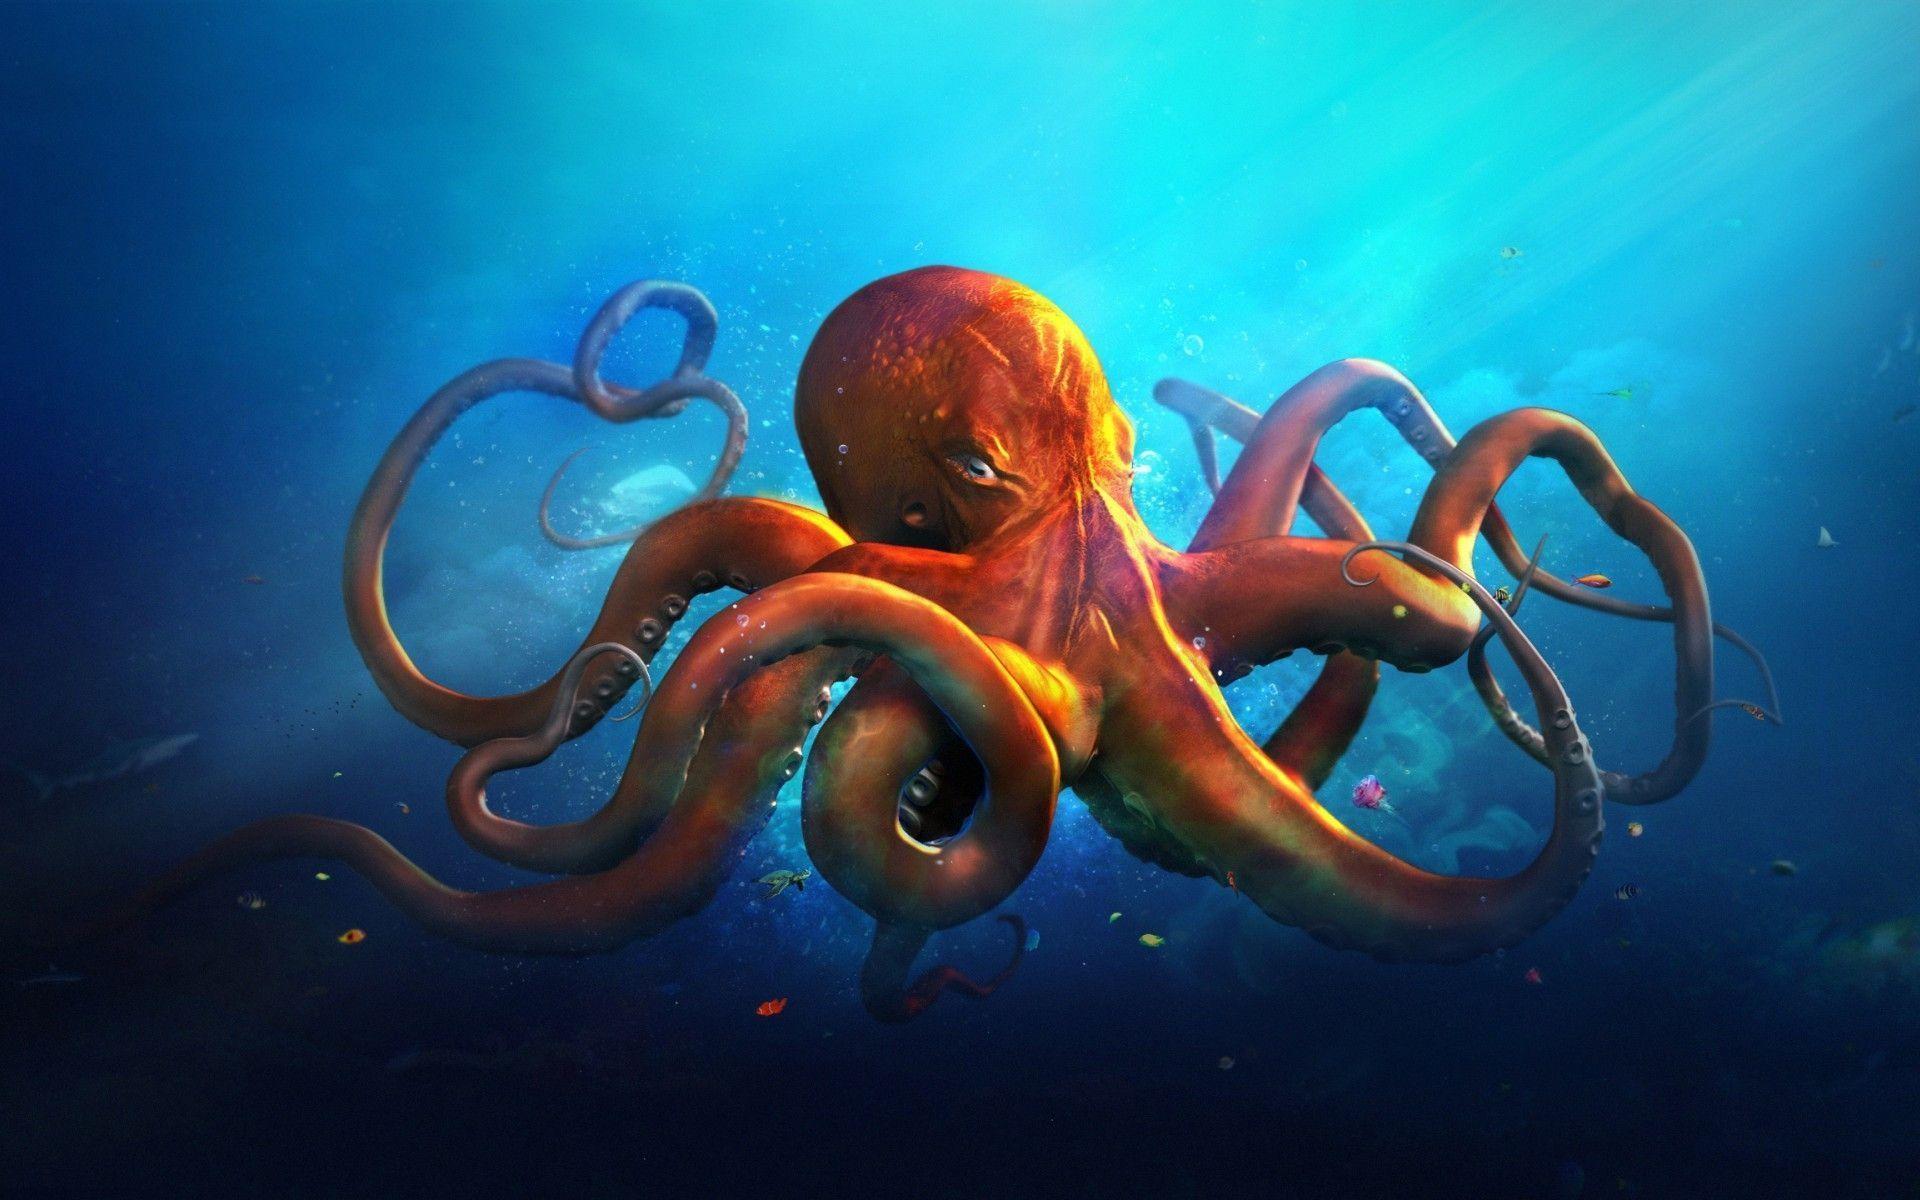 Octopus HD Wallpaper & Picture